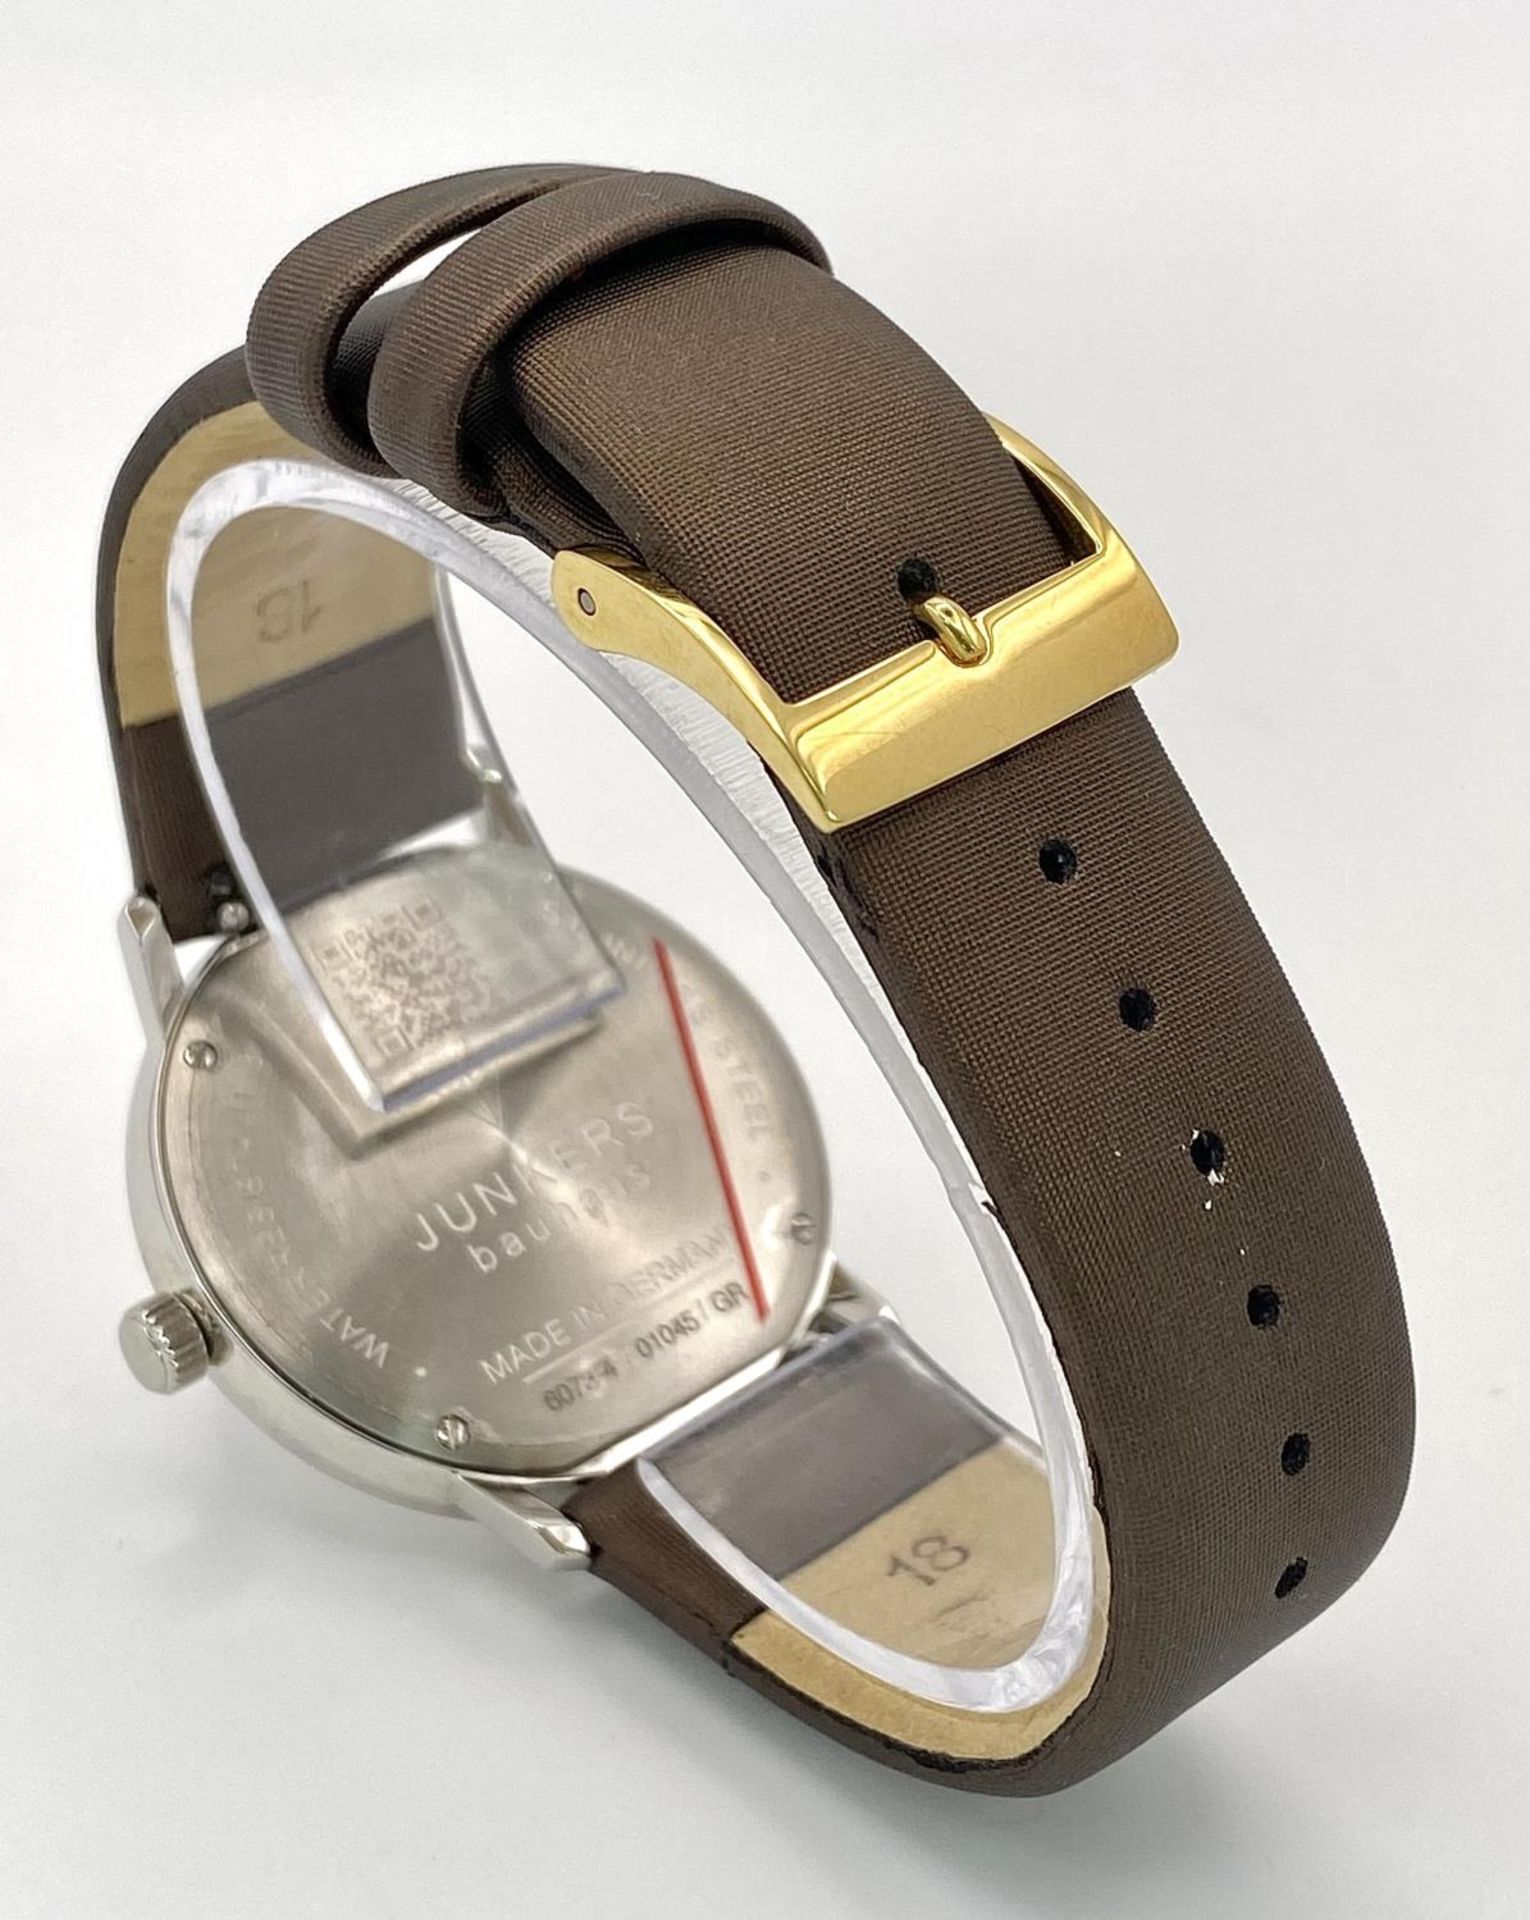 A Junkers Stylish Bauhaus Gents Quartz Watch. Brown leather strap. Stainless steel case - 35mm. - Image 5 of 8